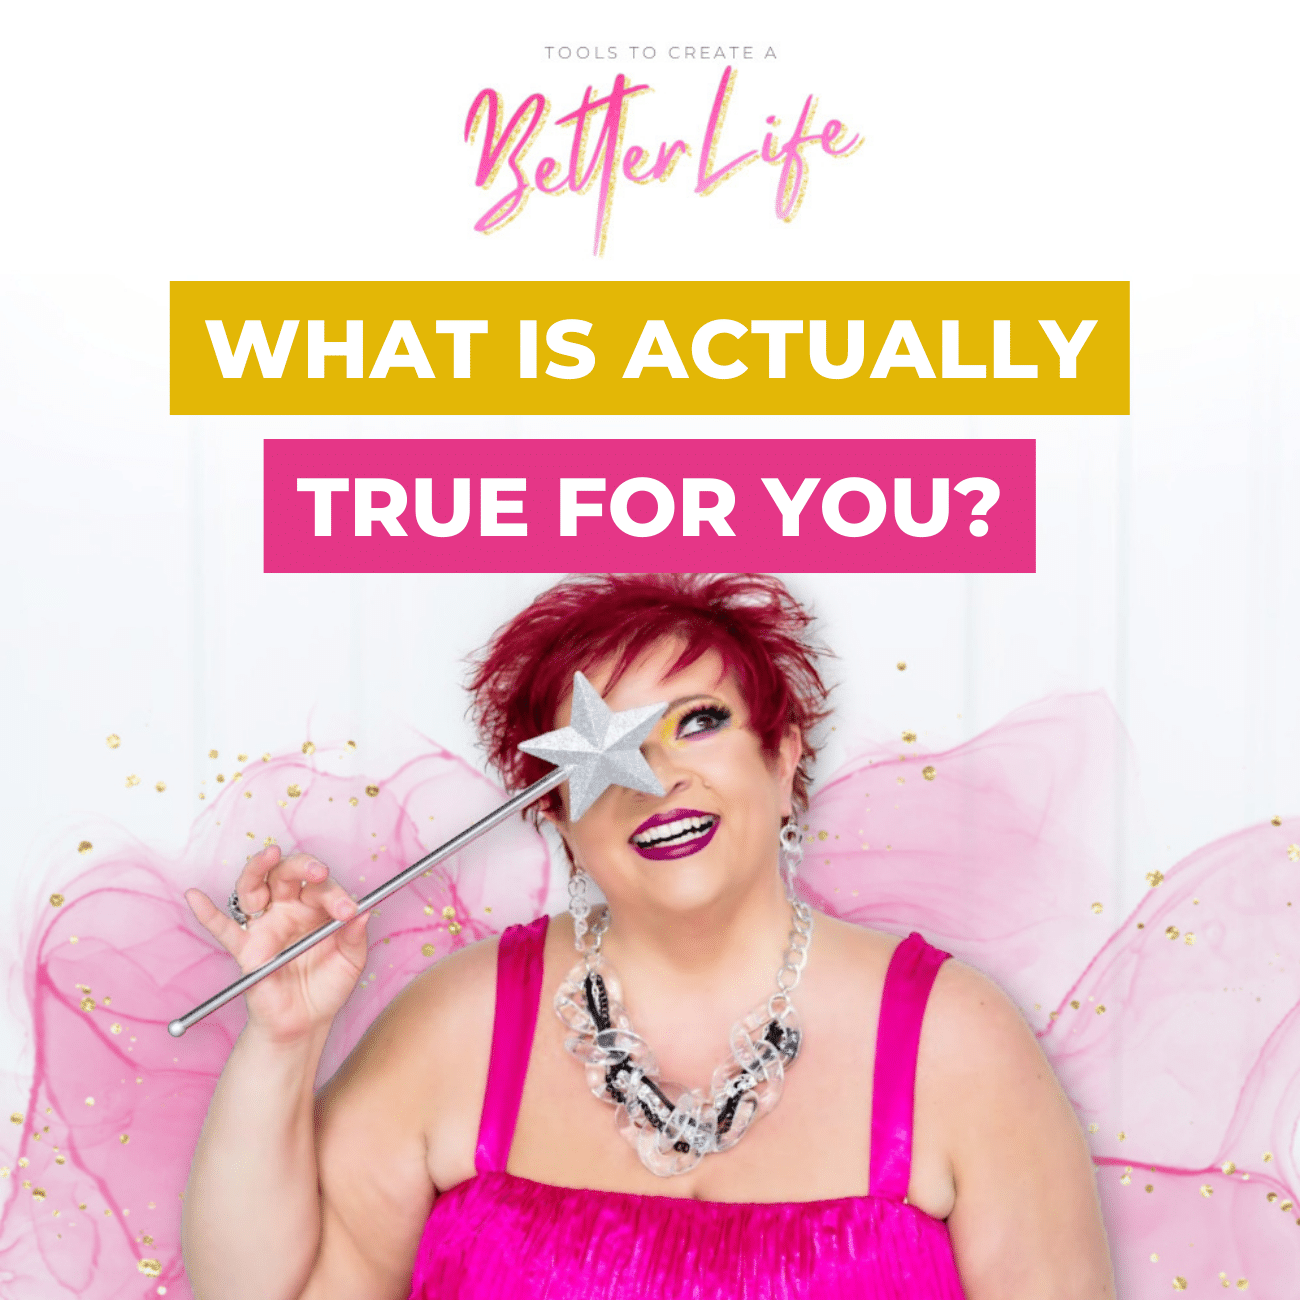 What is Actually True for You?